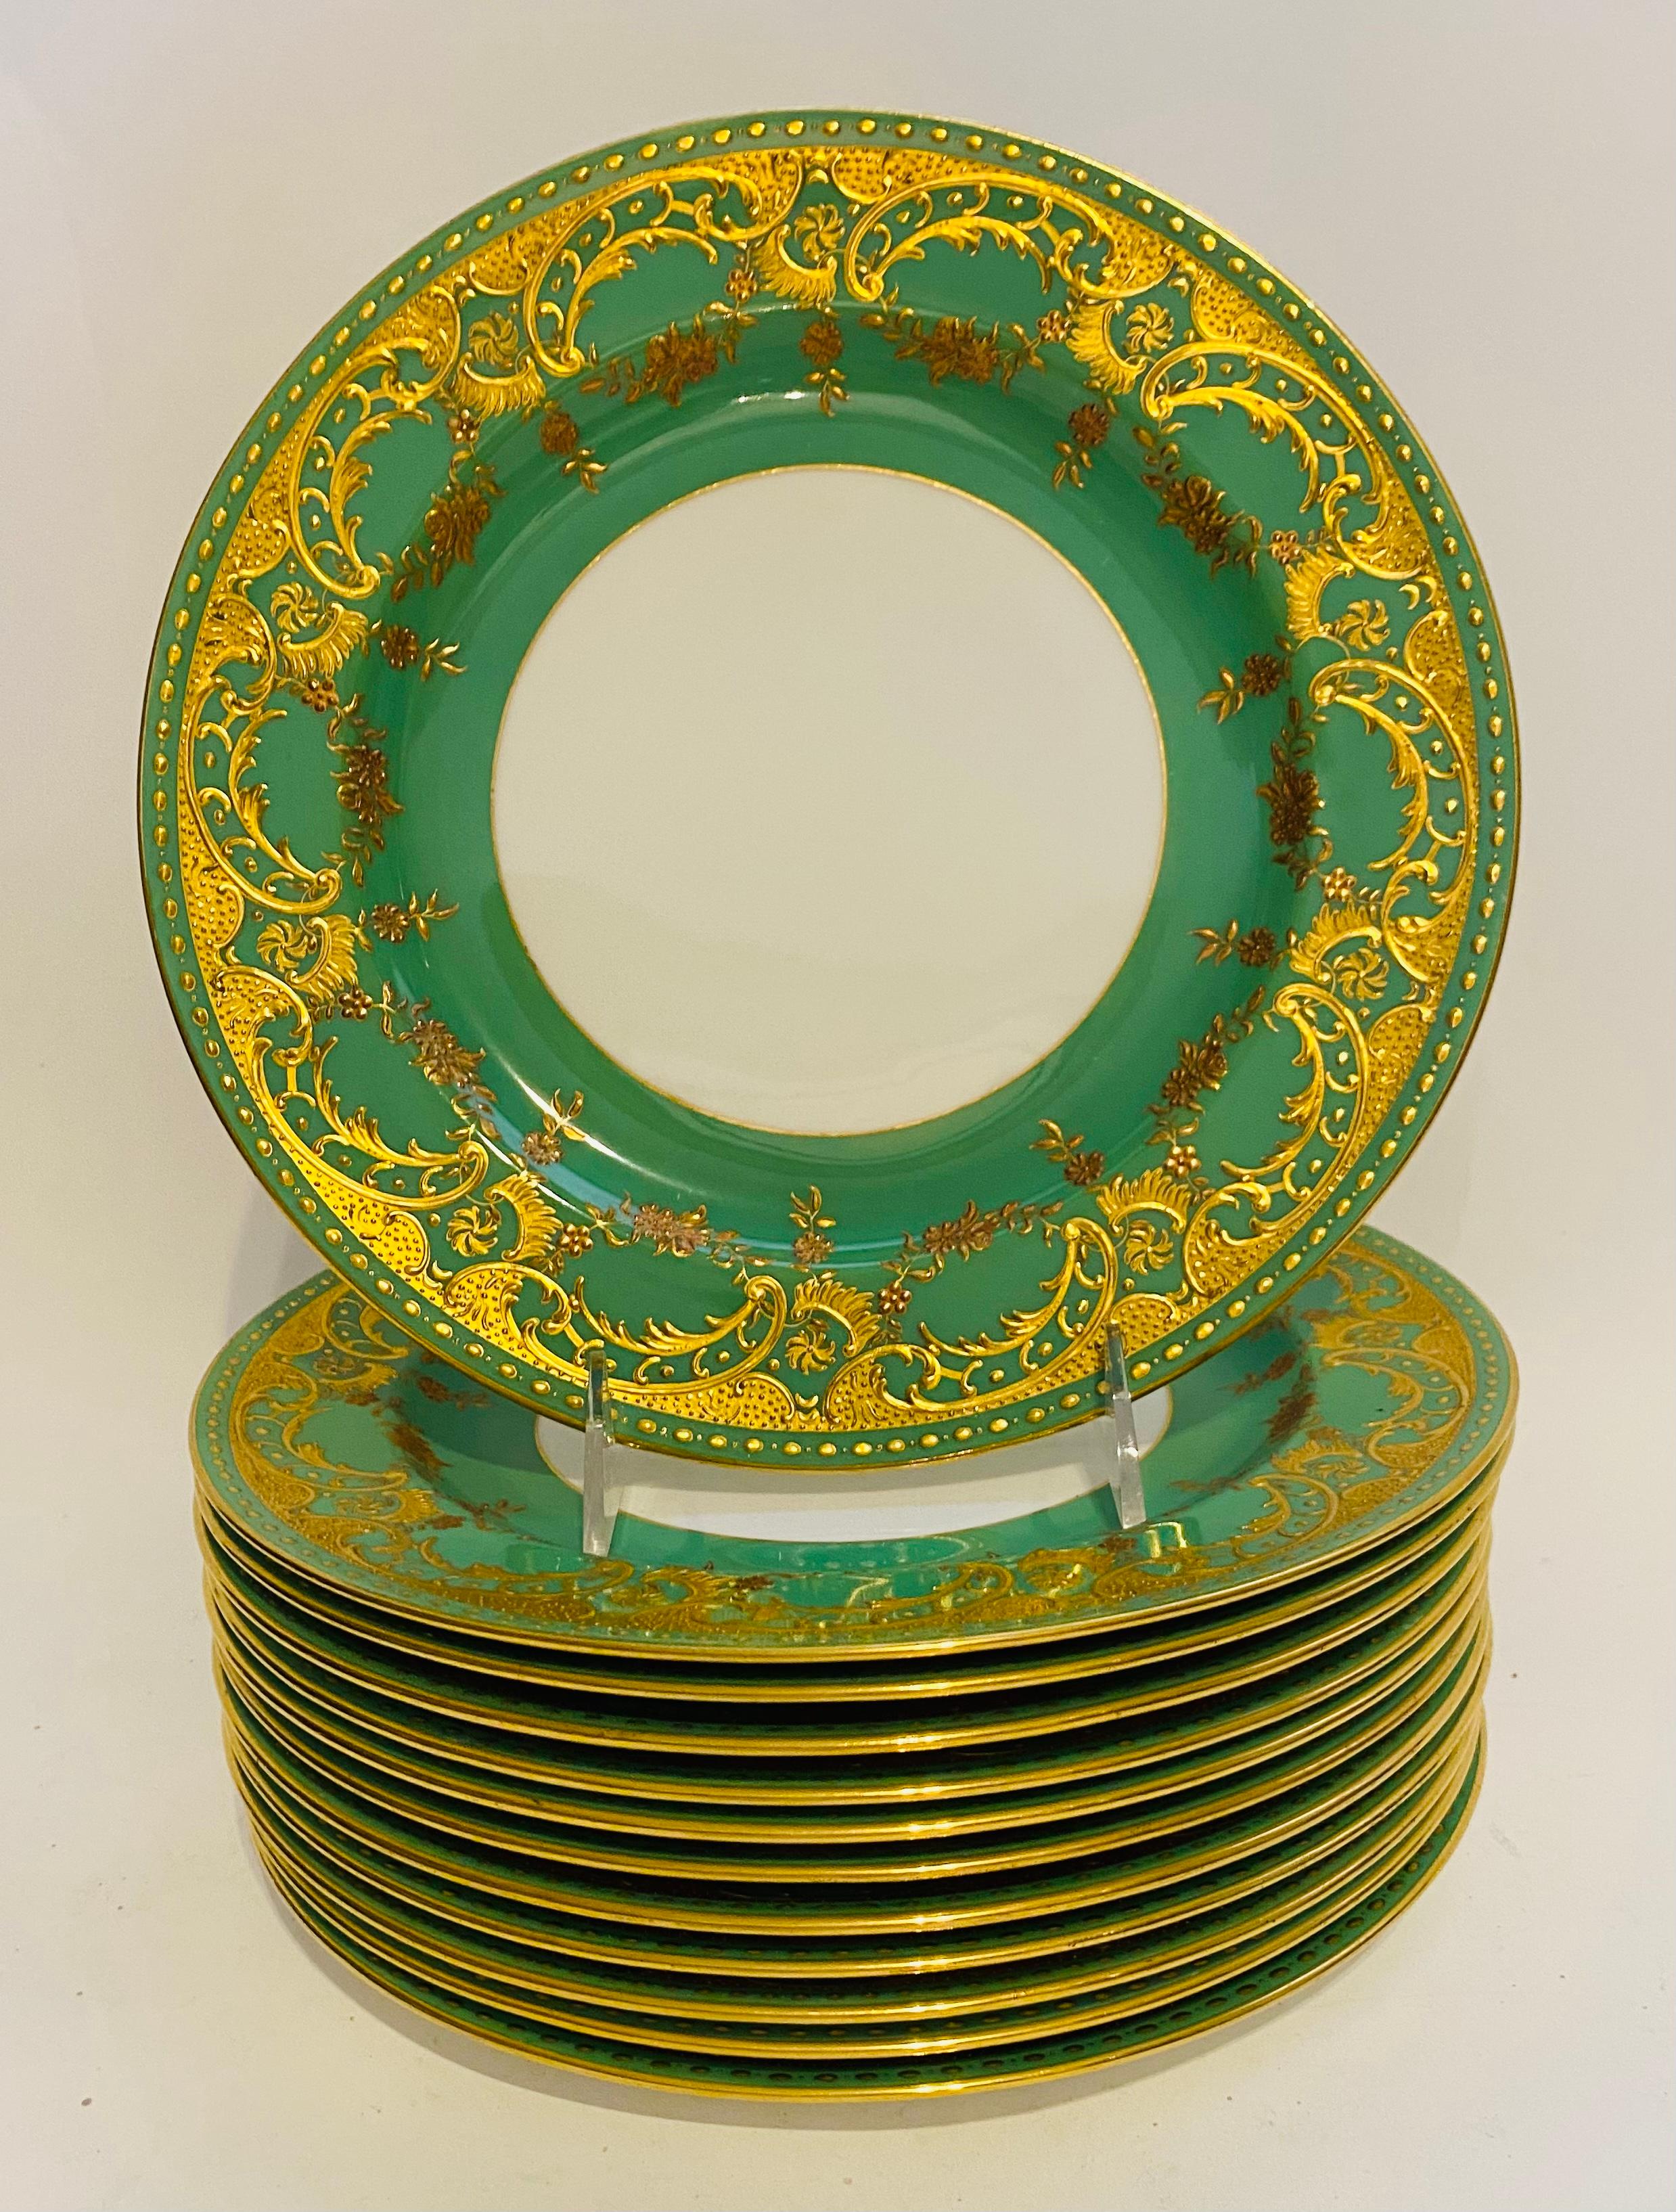 Hand-Crafted 12 Heavily Gilt Encrusted Antique Green & Gold Minton England Dinner Plates For Sale